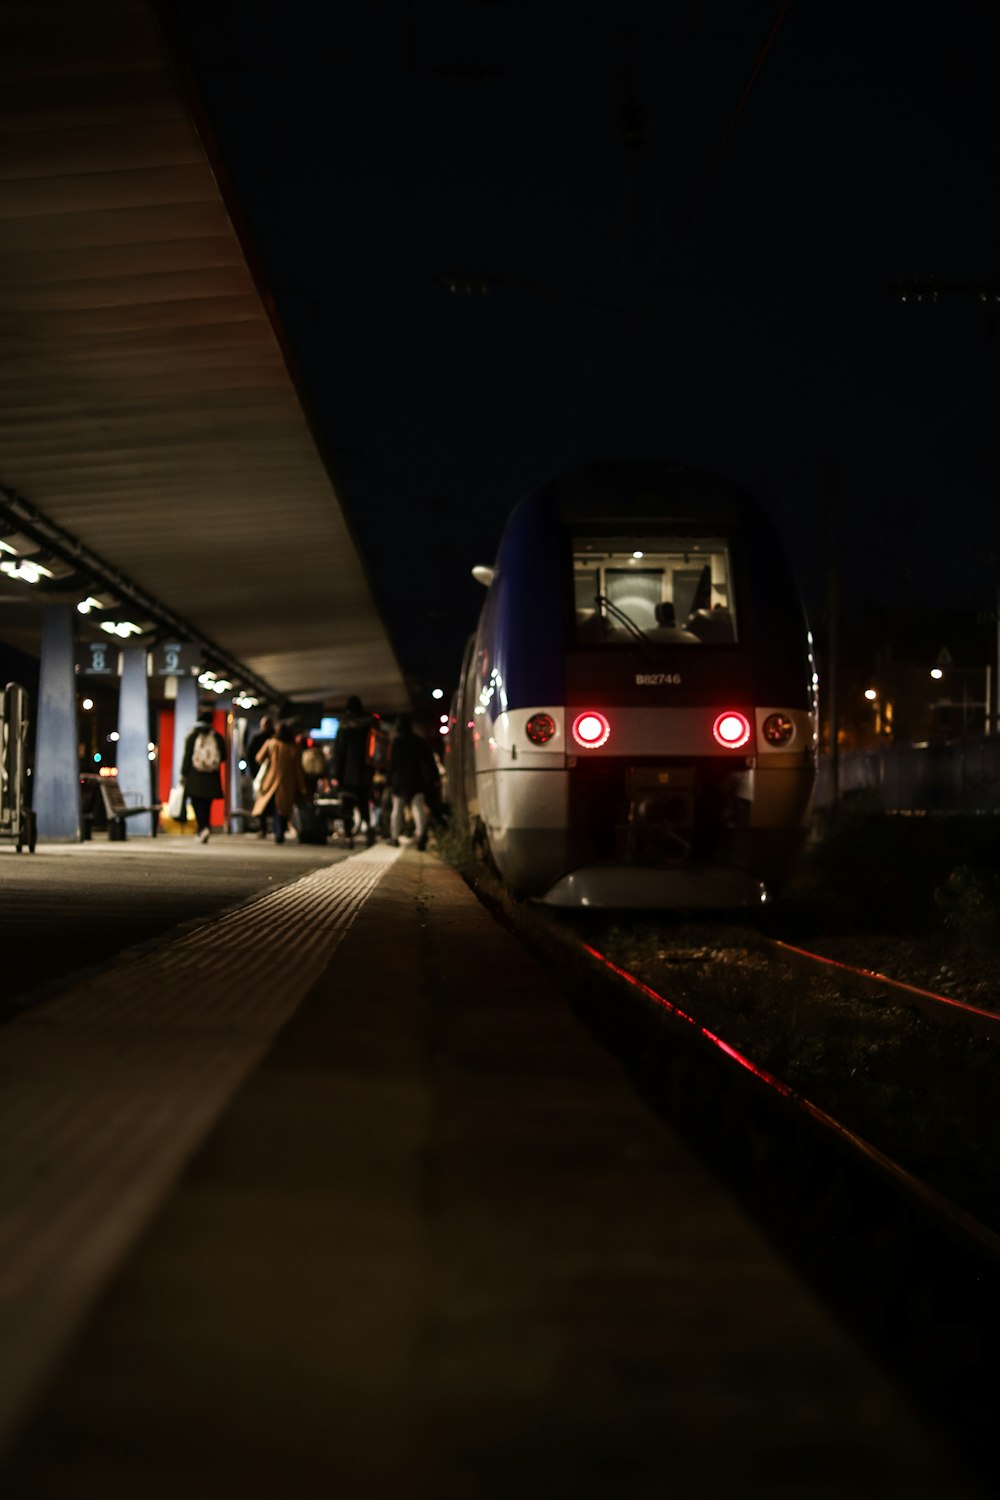 a train is pulling into a station at night